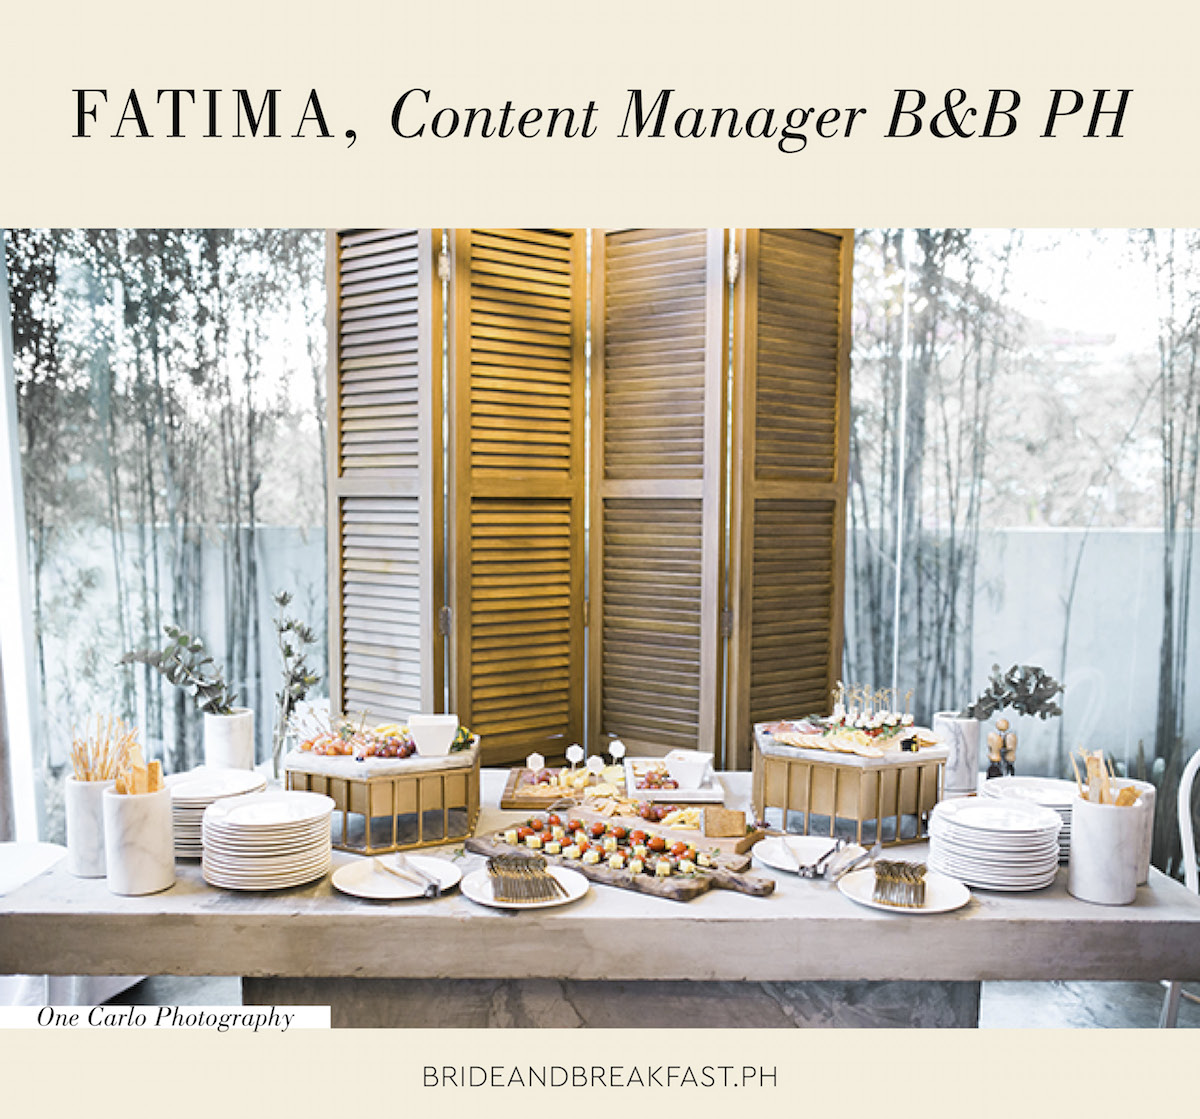 Fatima, Content Manager B&B PH Photo: One Carlo Photography